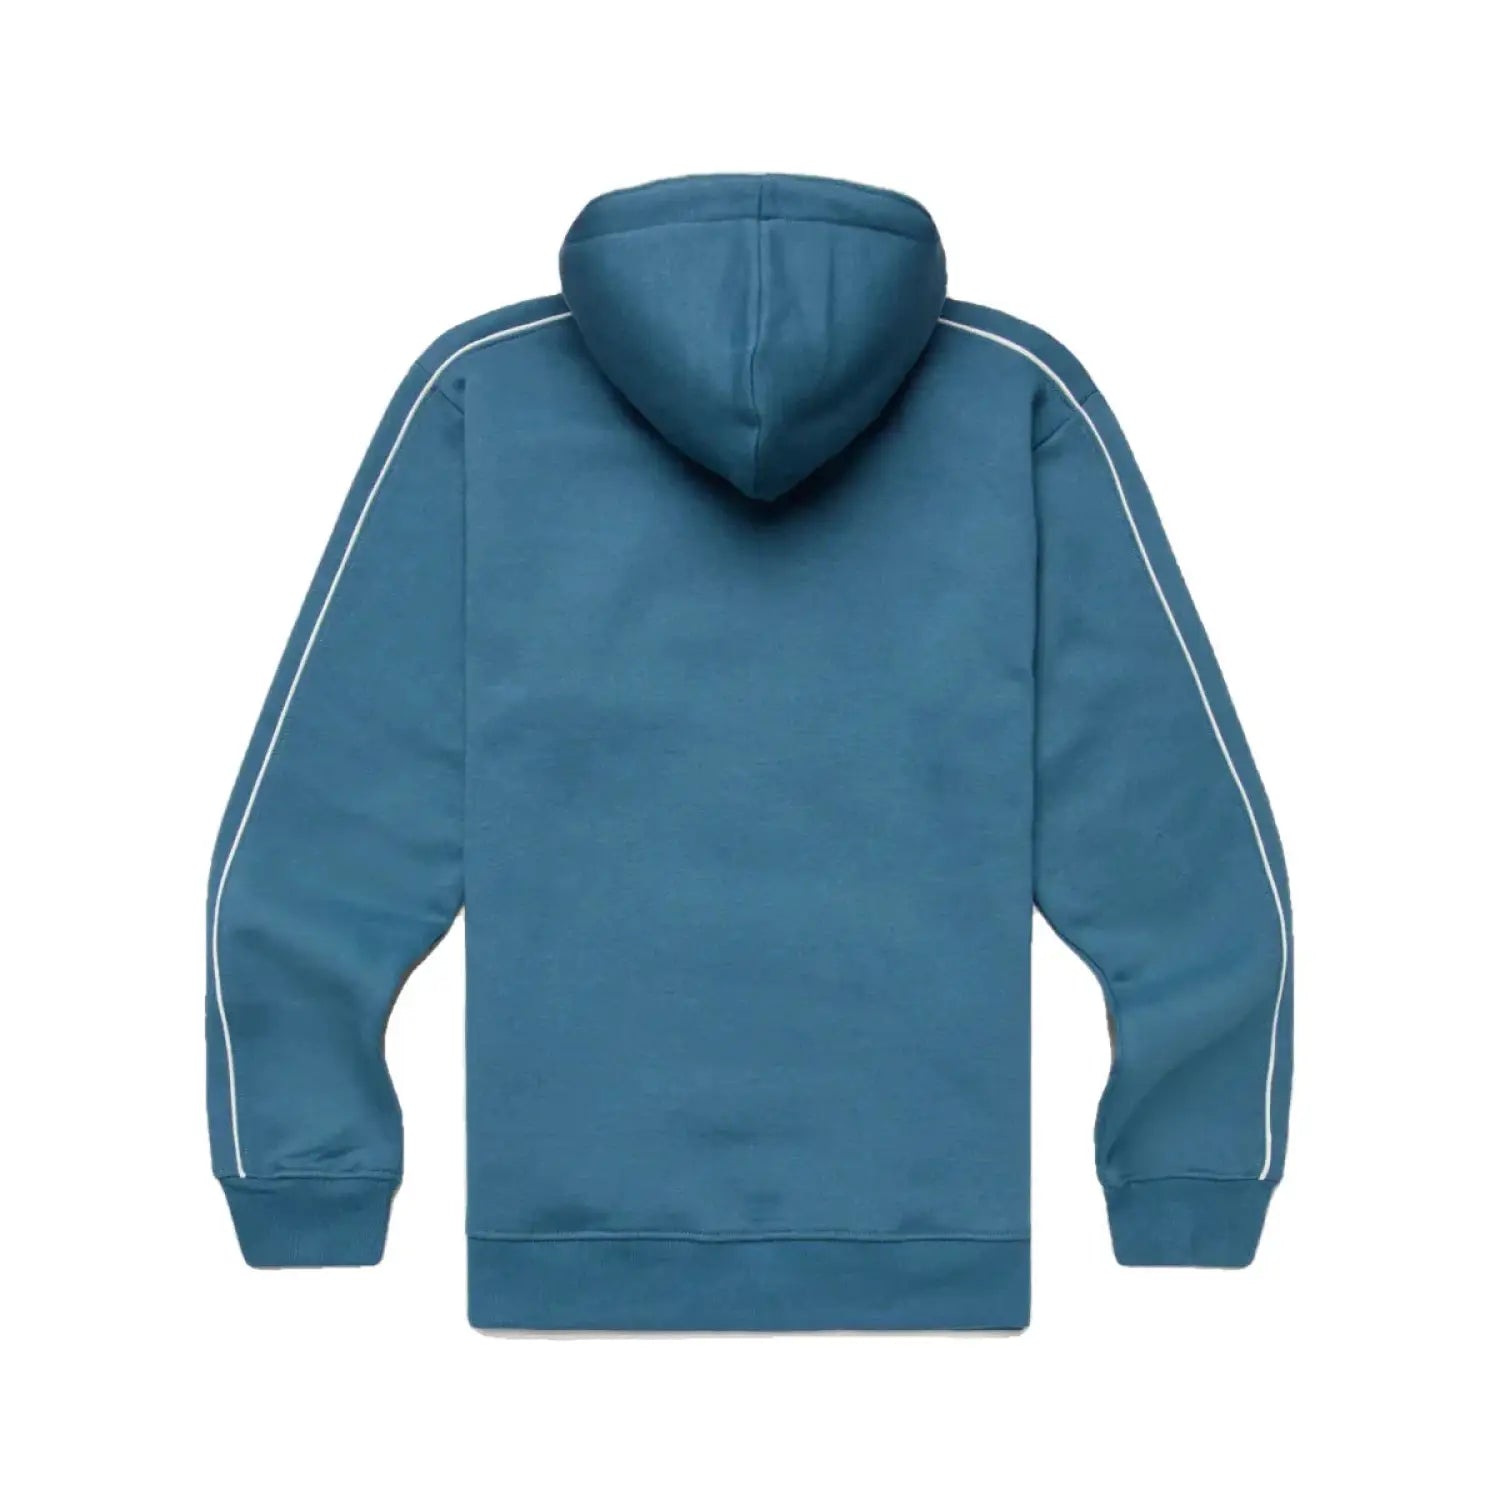 Cotopaxi Men's Day and Night Pullover Hoodie shown in Blue Spruce color option. Back view.